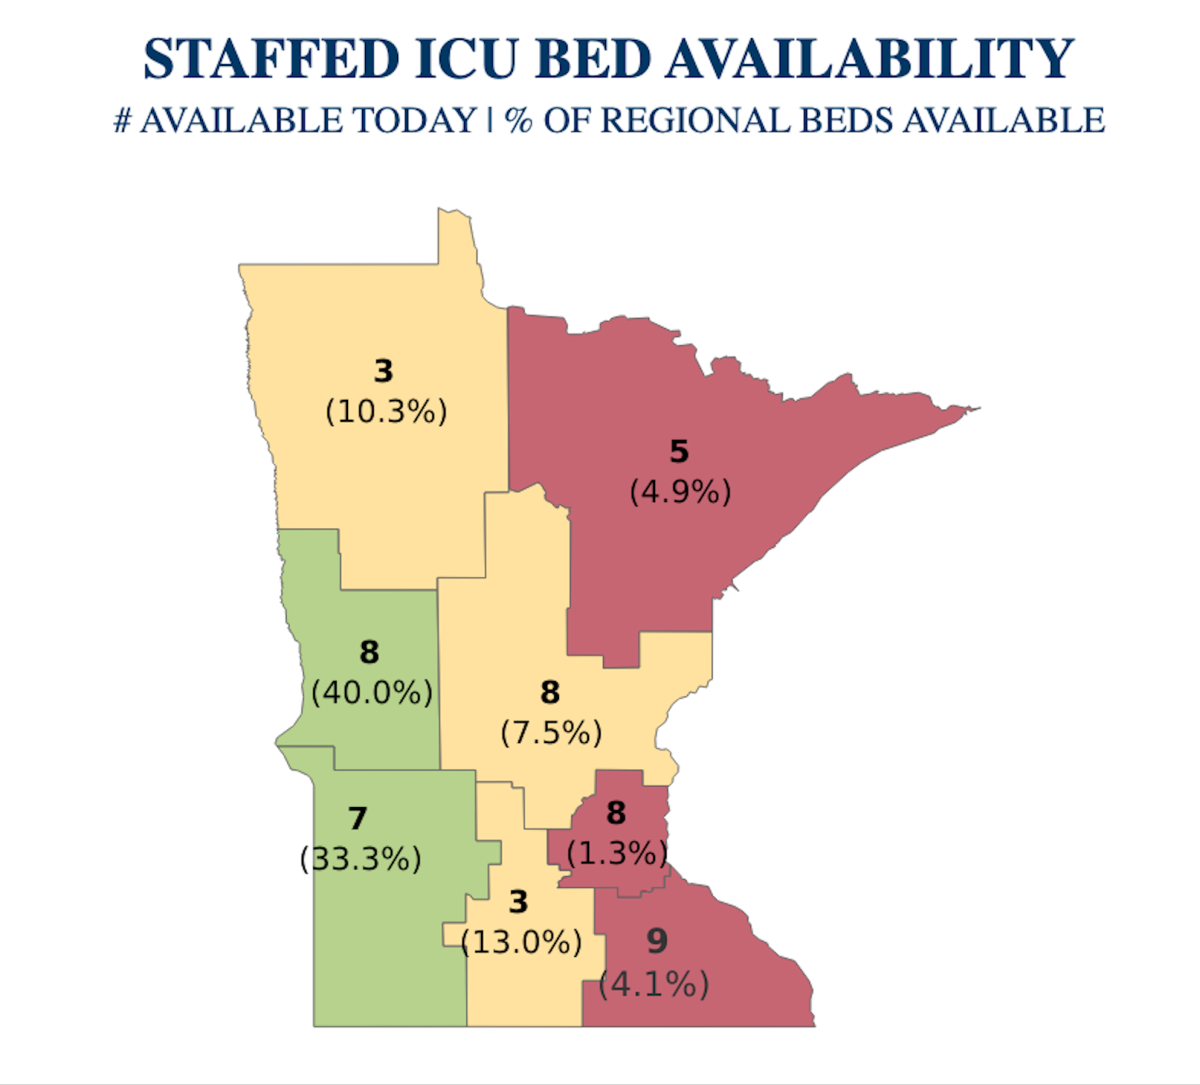 Staffed ICU bed availability as of Sept. 29, 2021. 